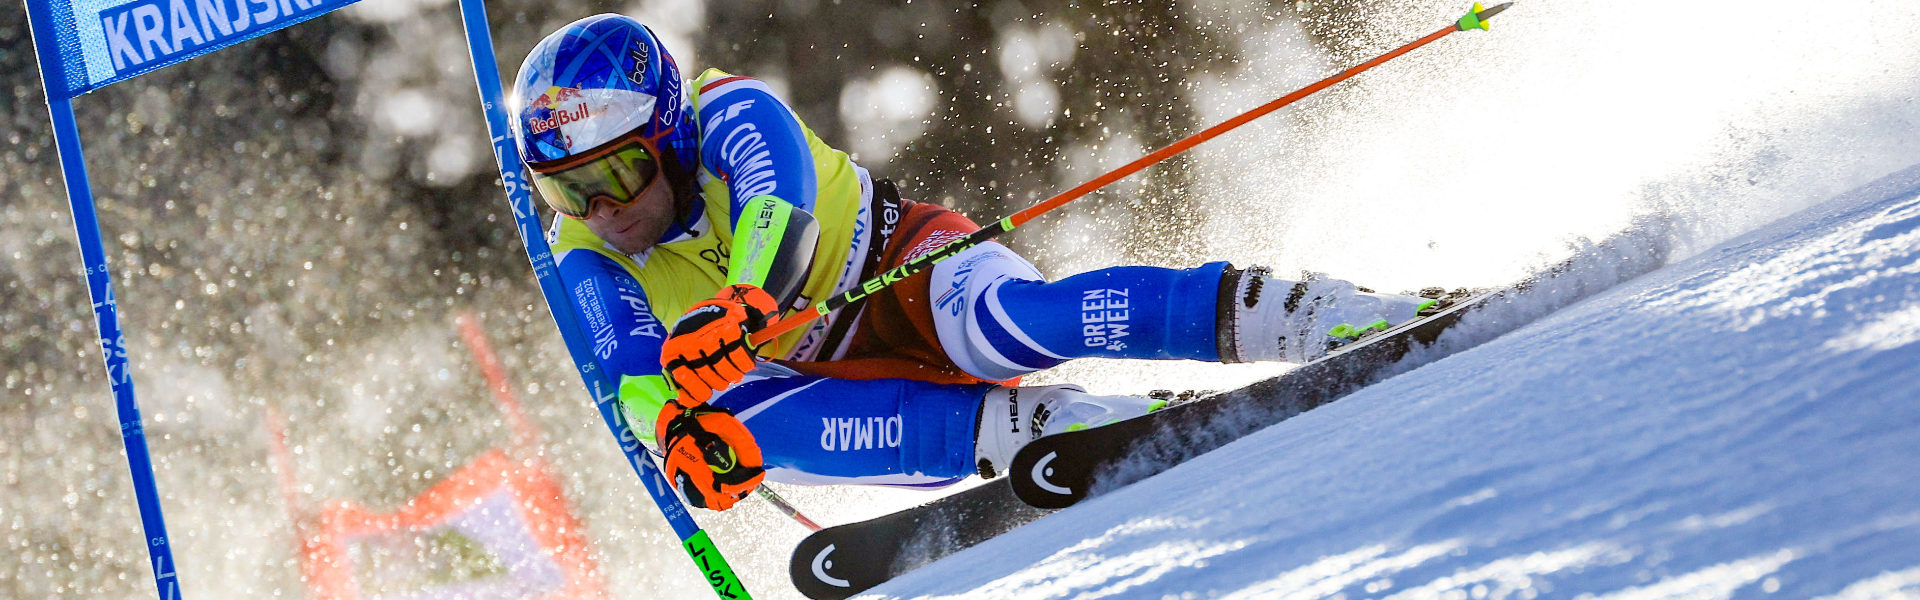 Alexis Pinturault podiums again in the Giant Slalom 